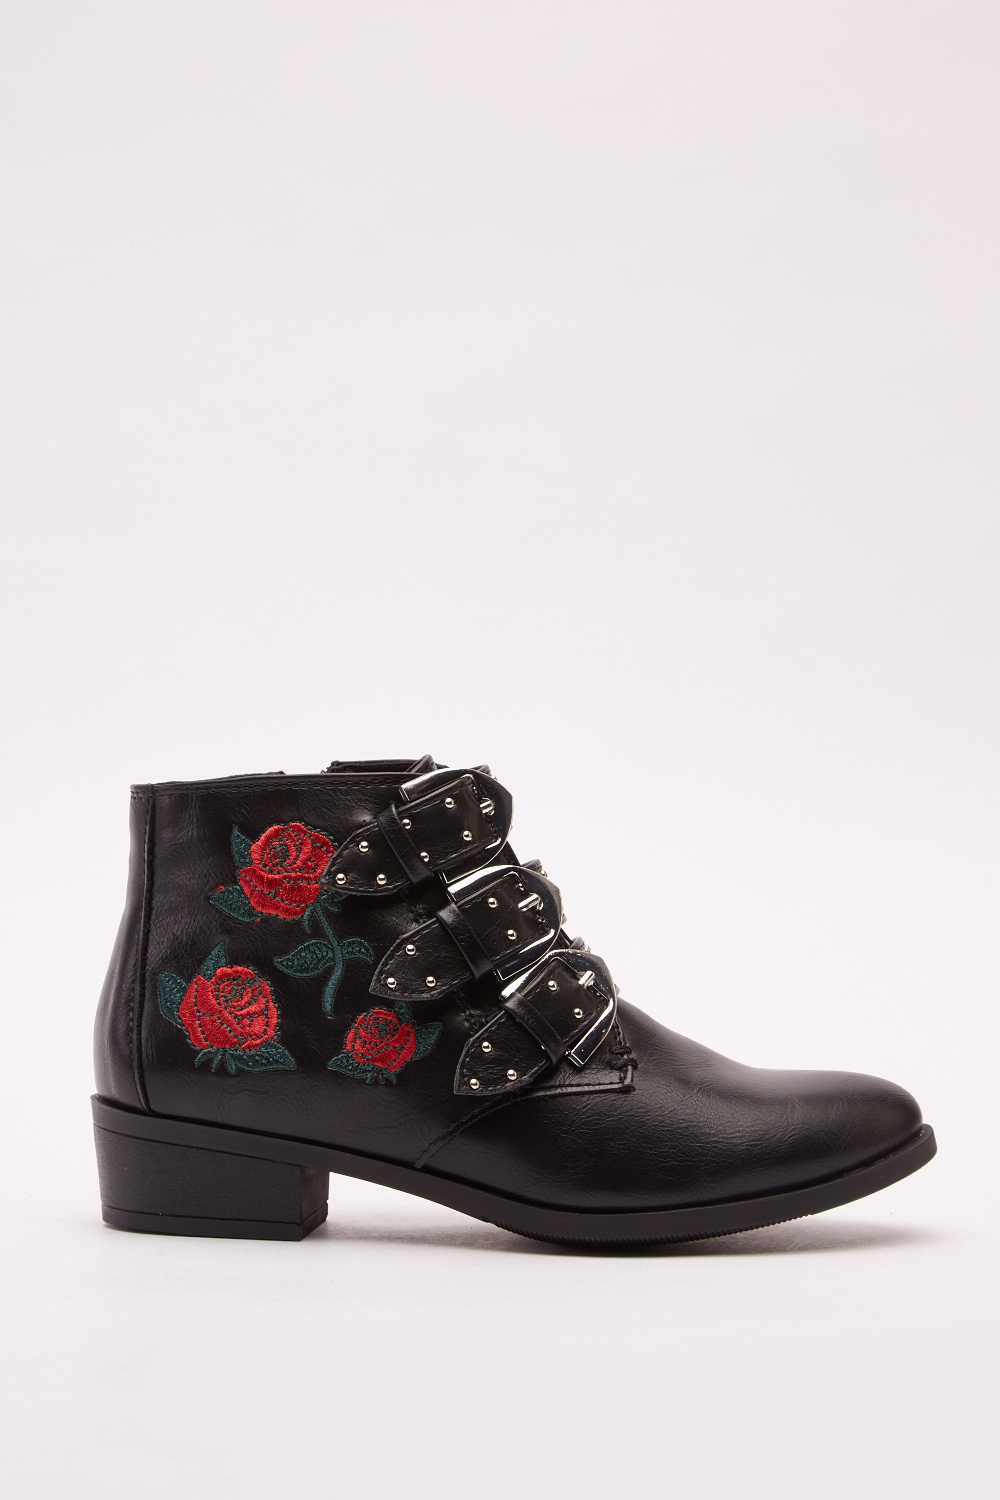 Rose Embroidered Ankle Boots - Just $6